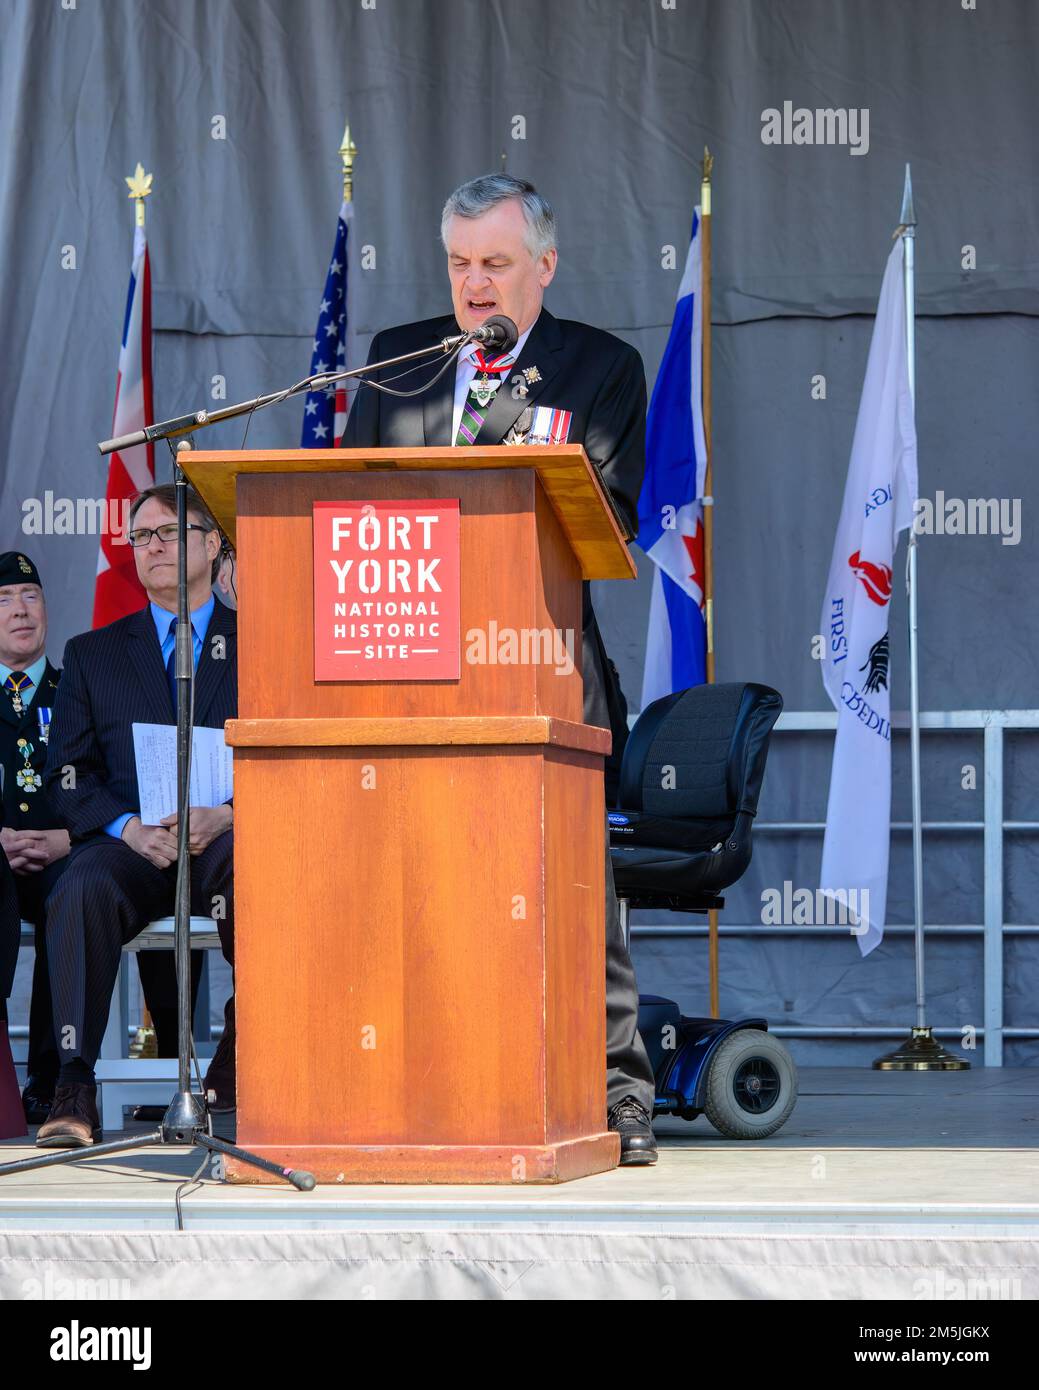 David Charles Onley, Lieutenant Governor of Ontario, publicly speaks from the podium on the stage in Fort York Stock Photo